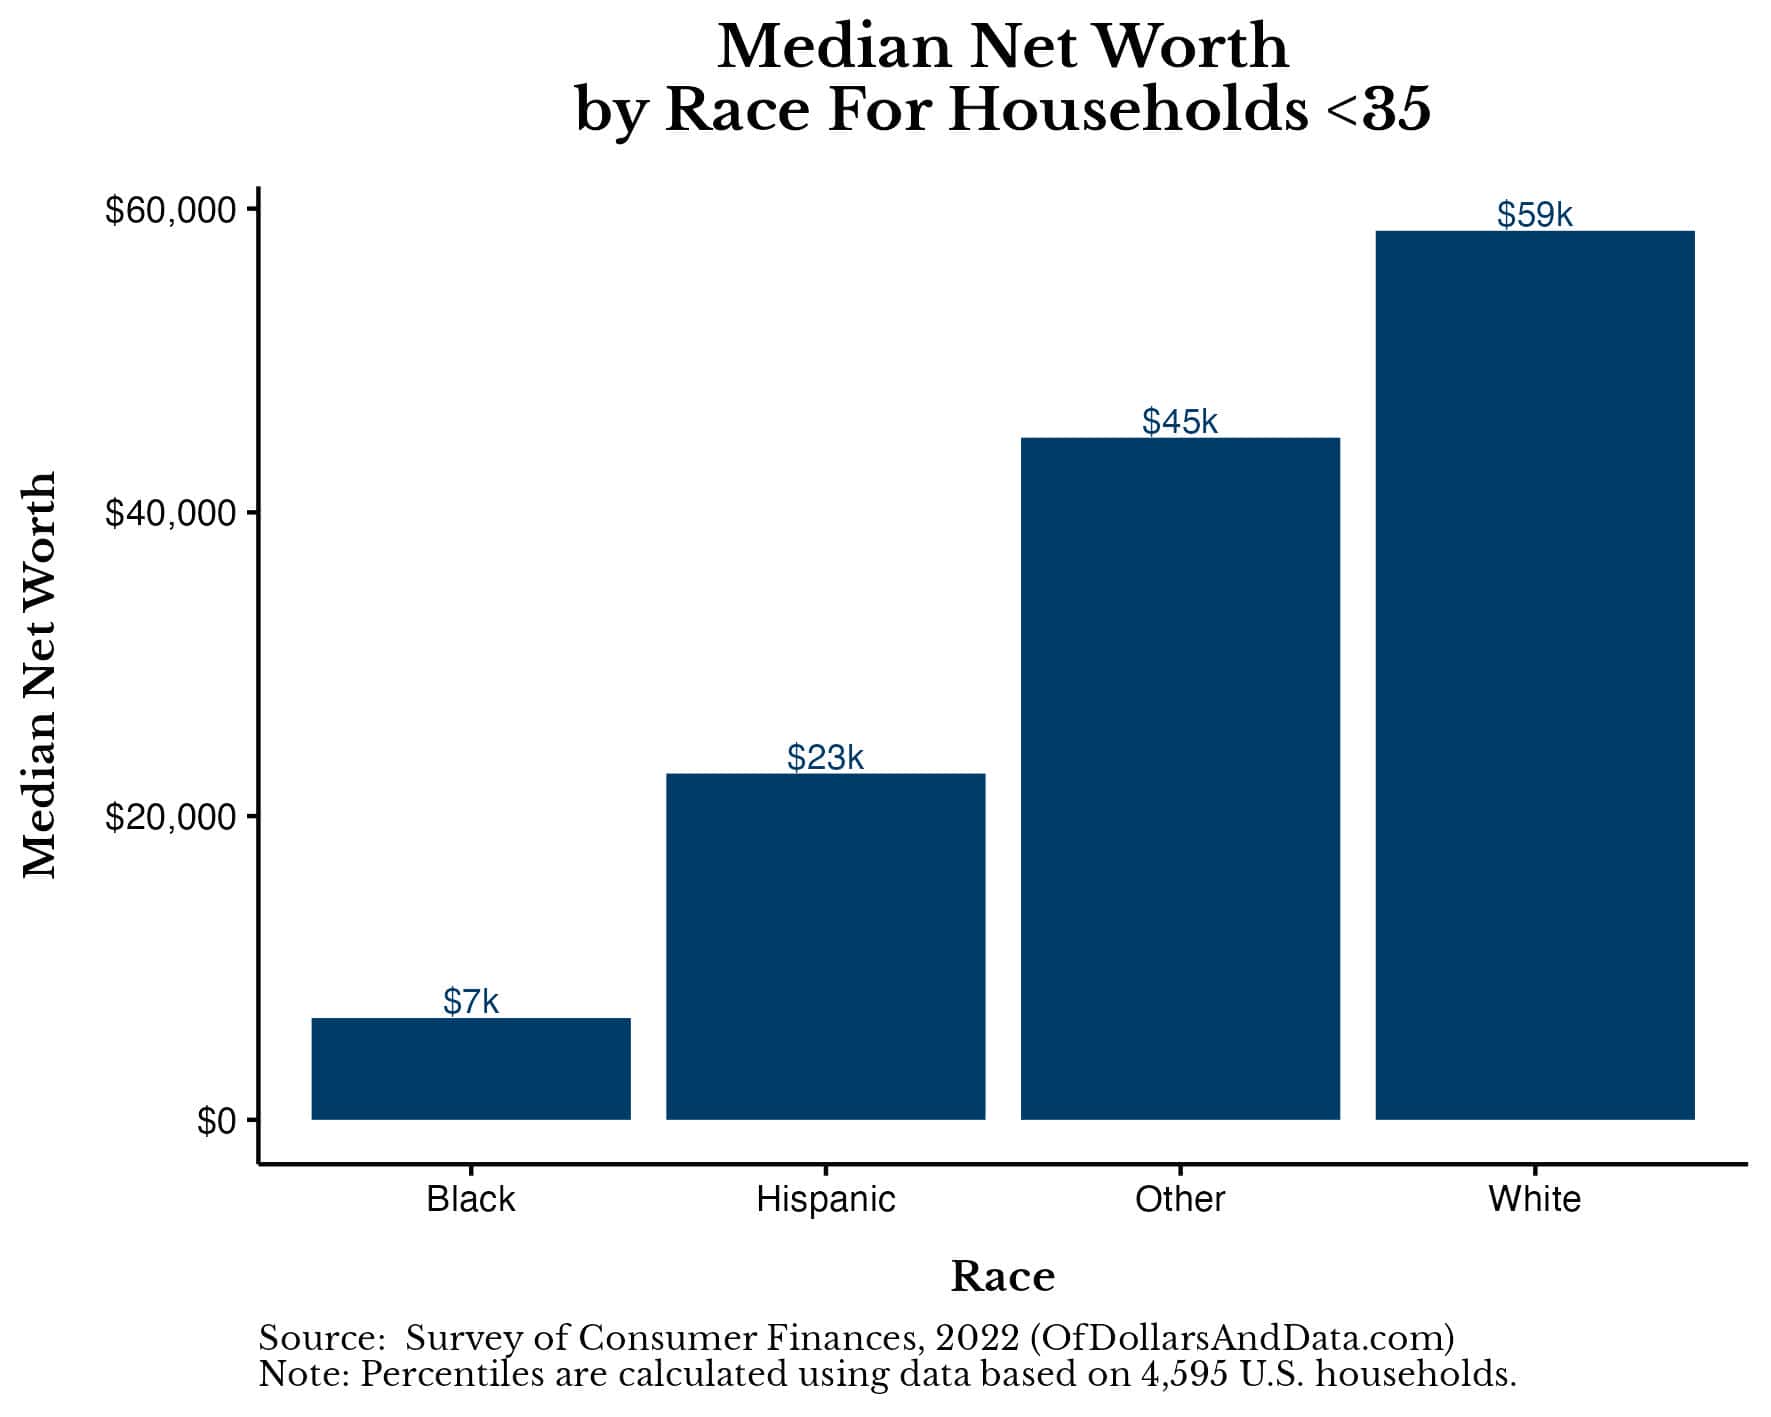 Median net worth of households under 35 years old by race in the 2022 SCF data.